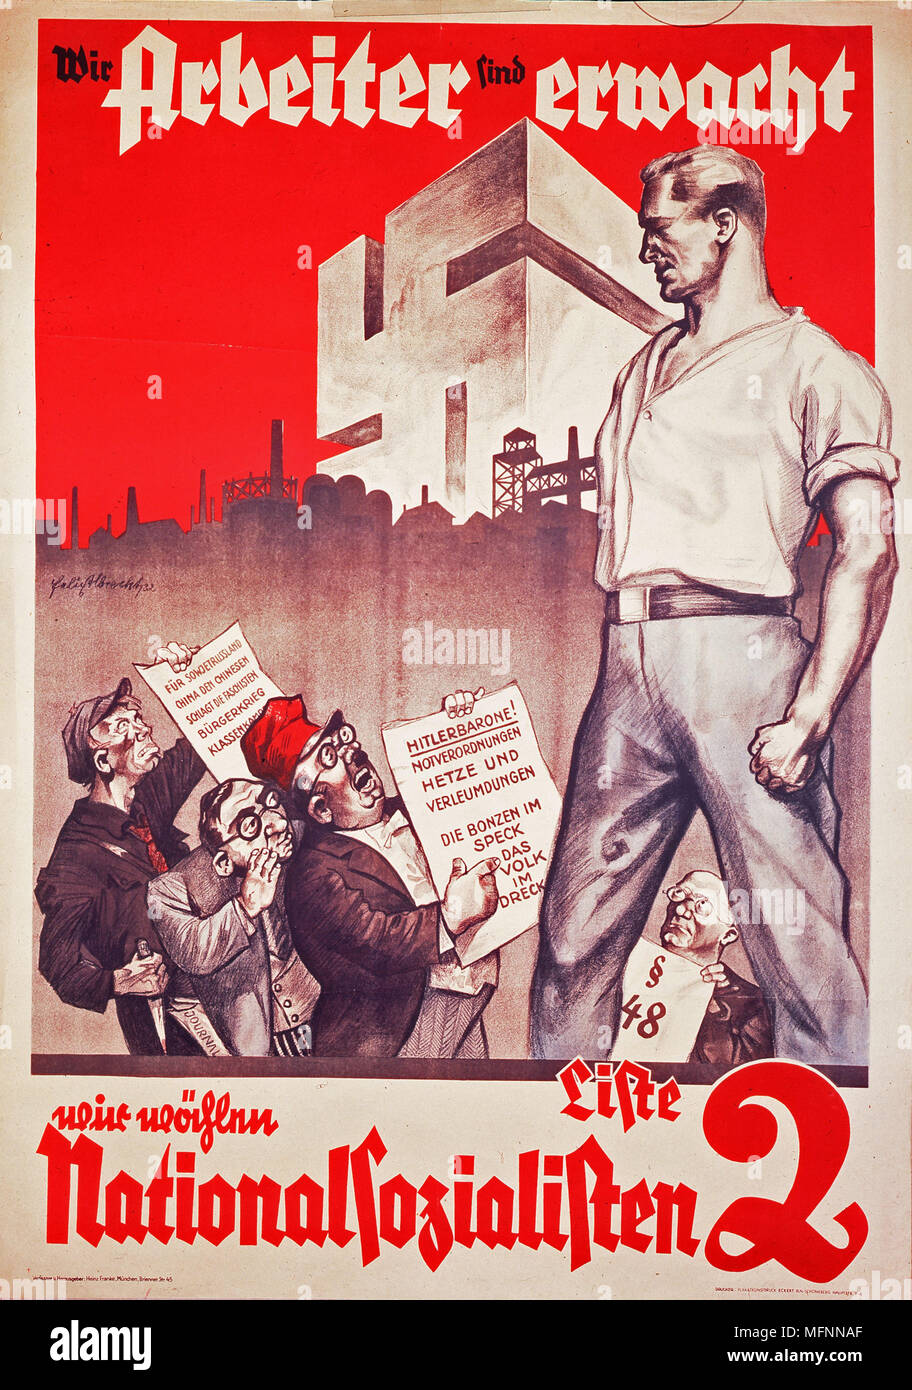 Awakening of the Workers. German National Socialist Party poster, 1932 Stock Photo